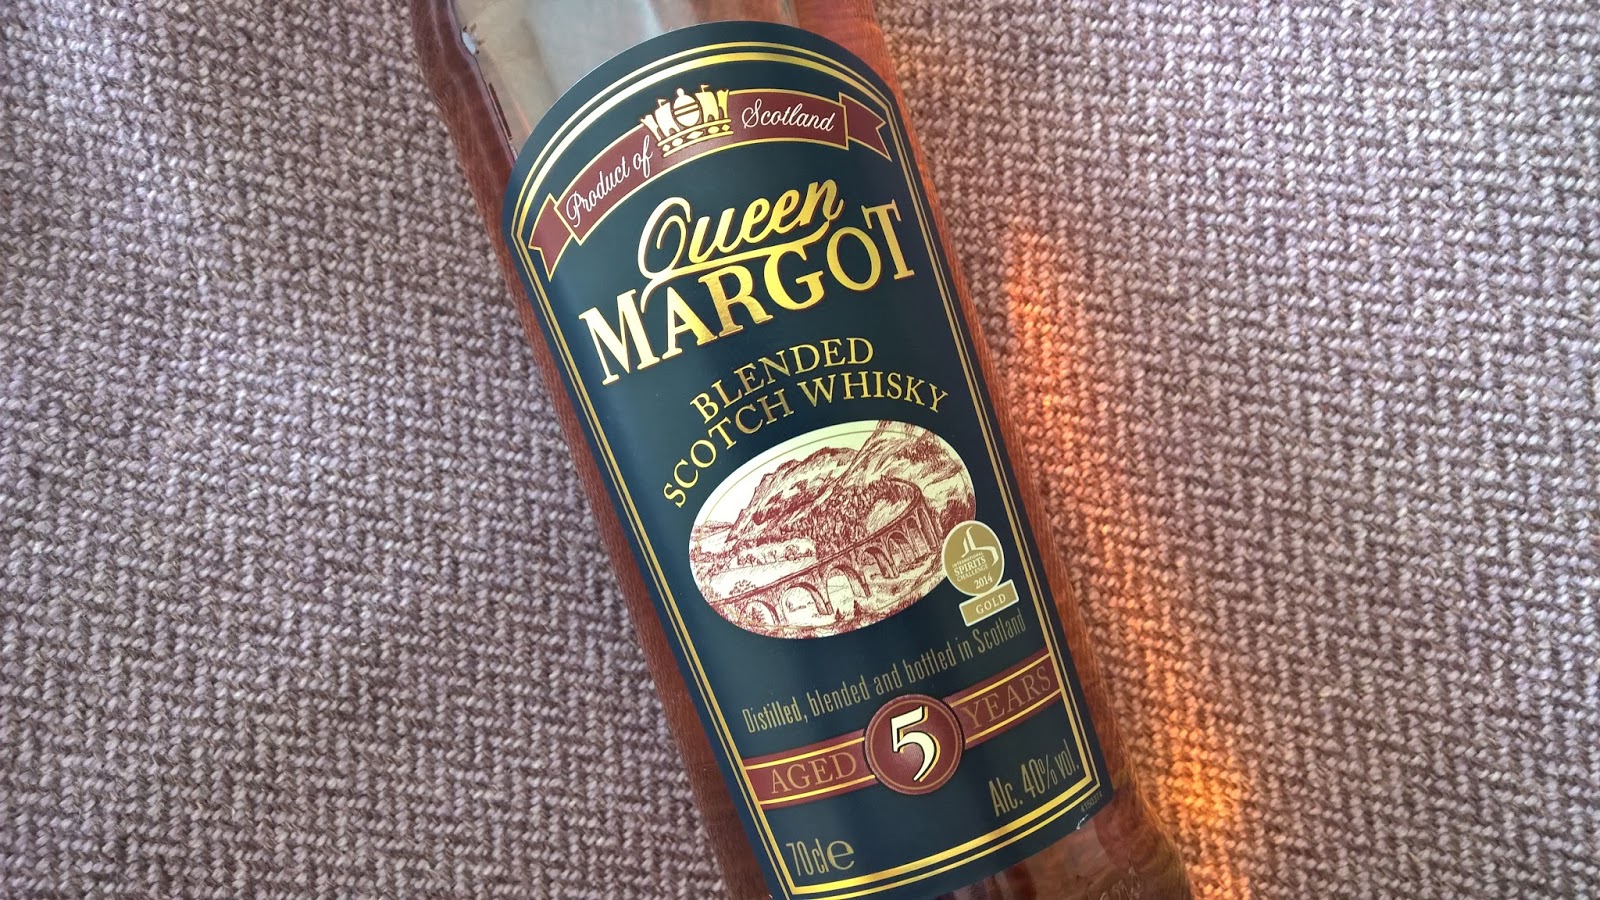 Review: Queen Margot Blended Scotch Whisky